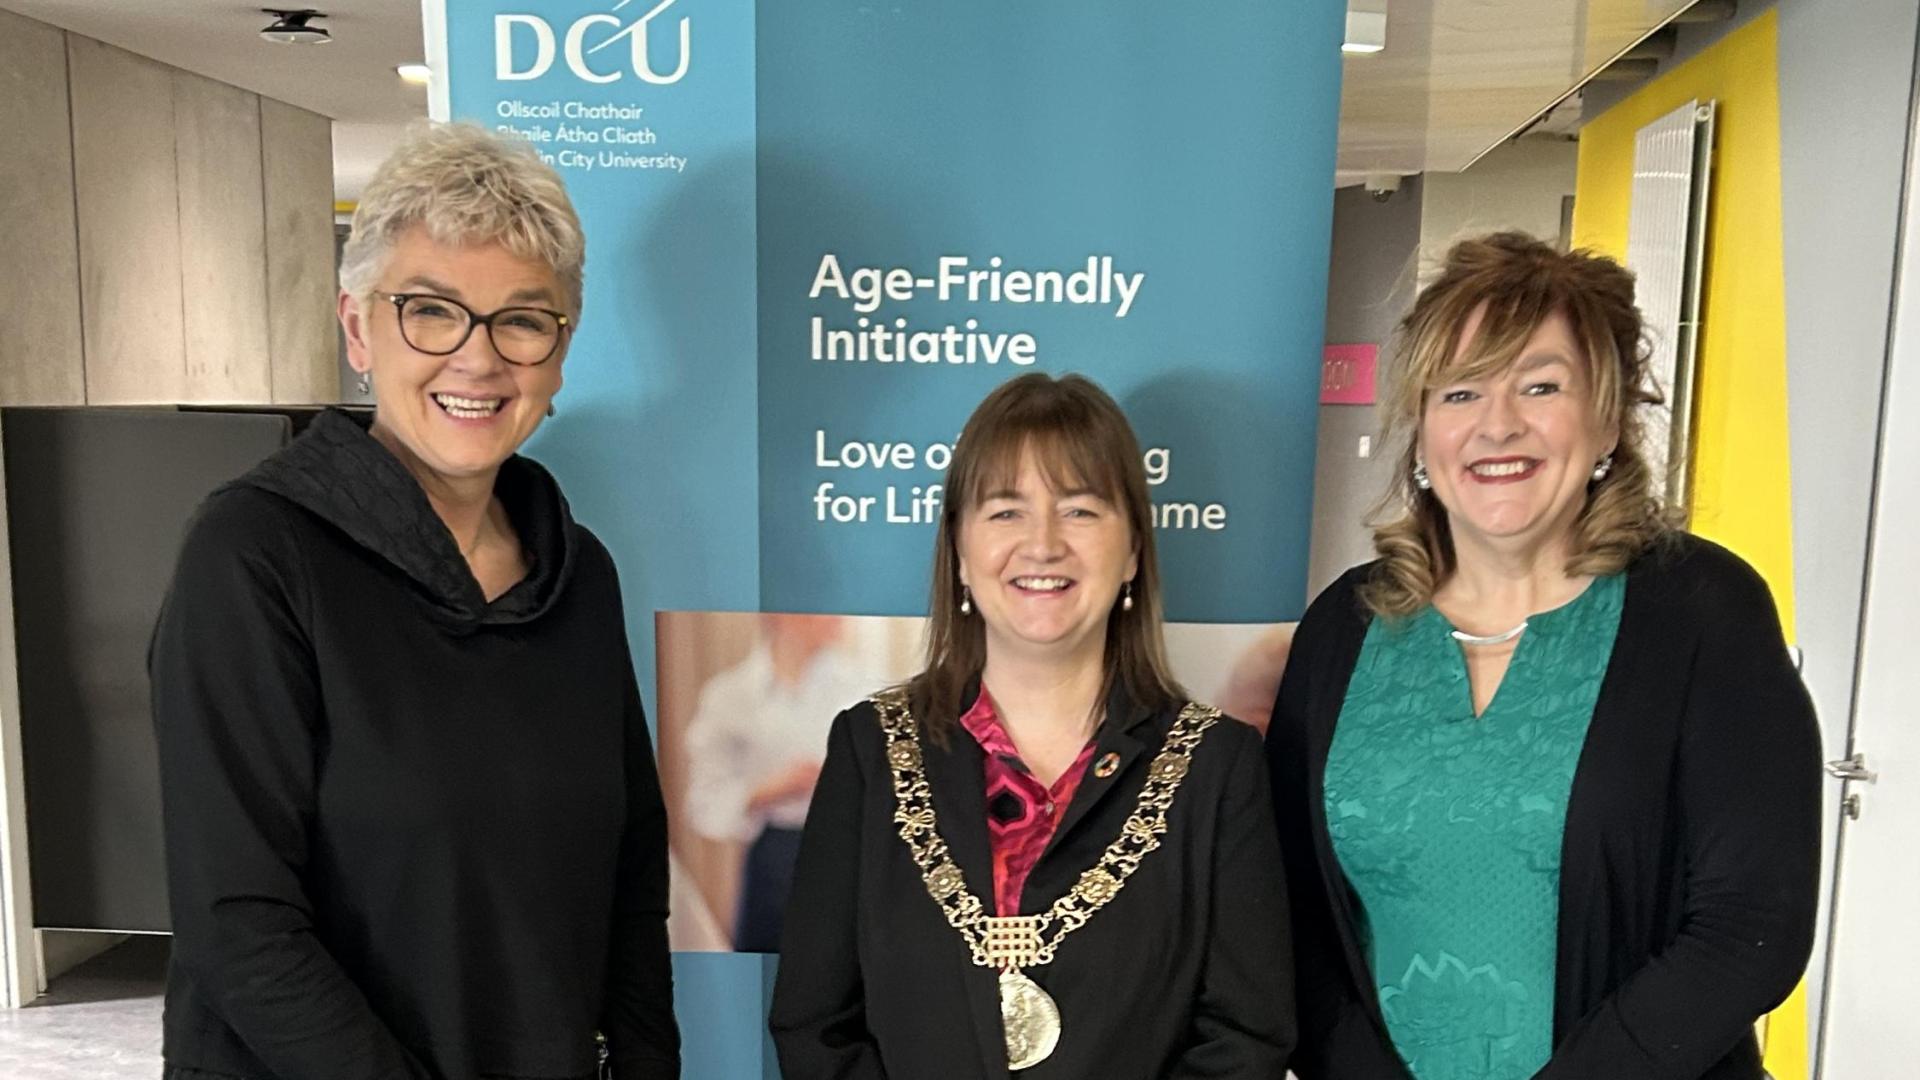 Lord Mayor of Dublin with Claire Bohan and Christine O'Kelly 